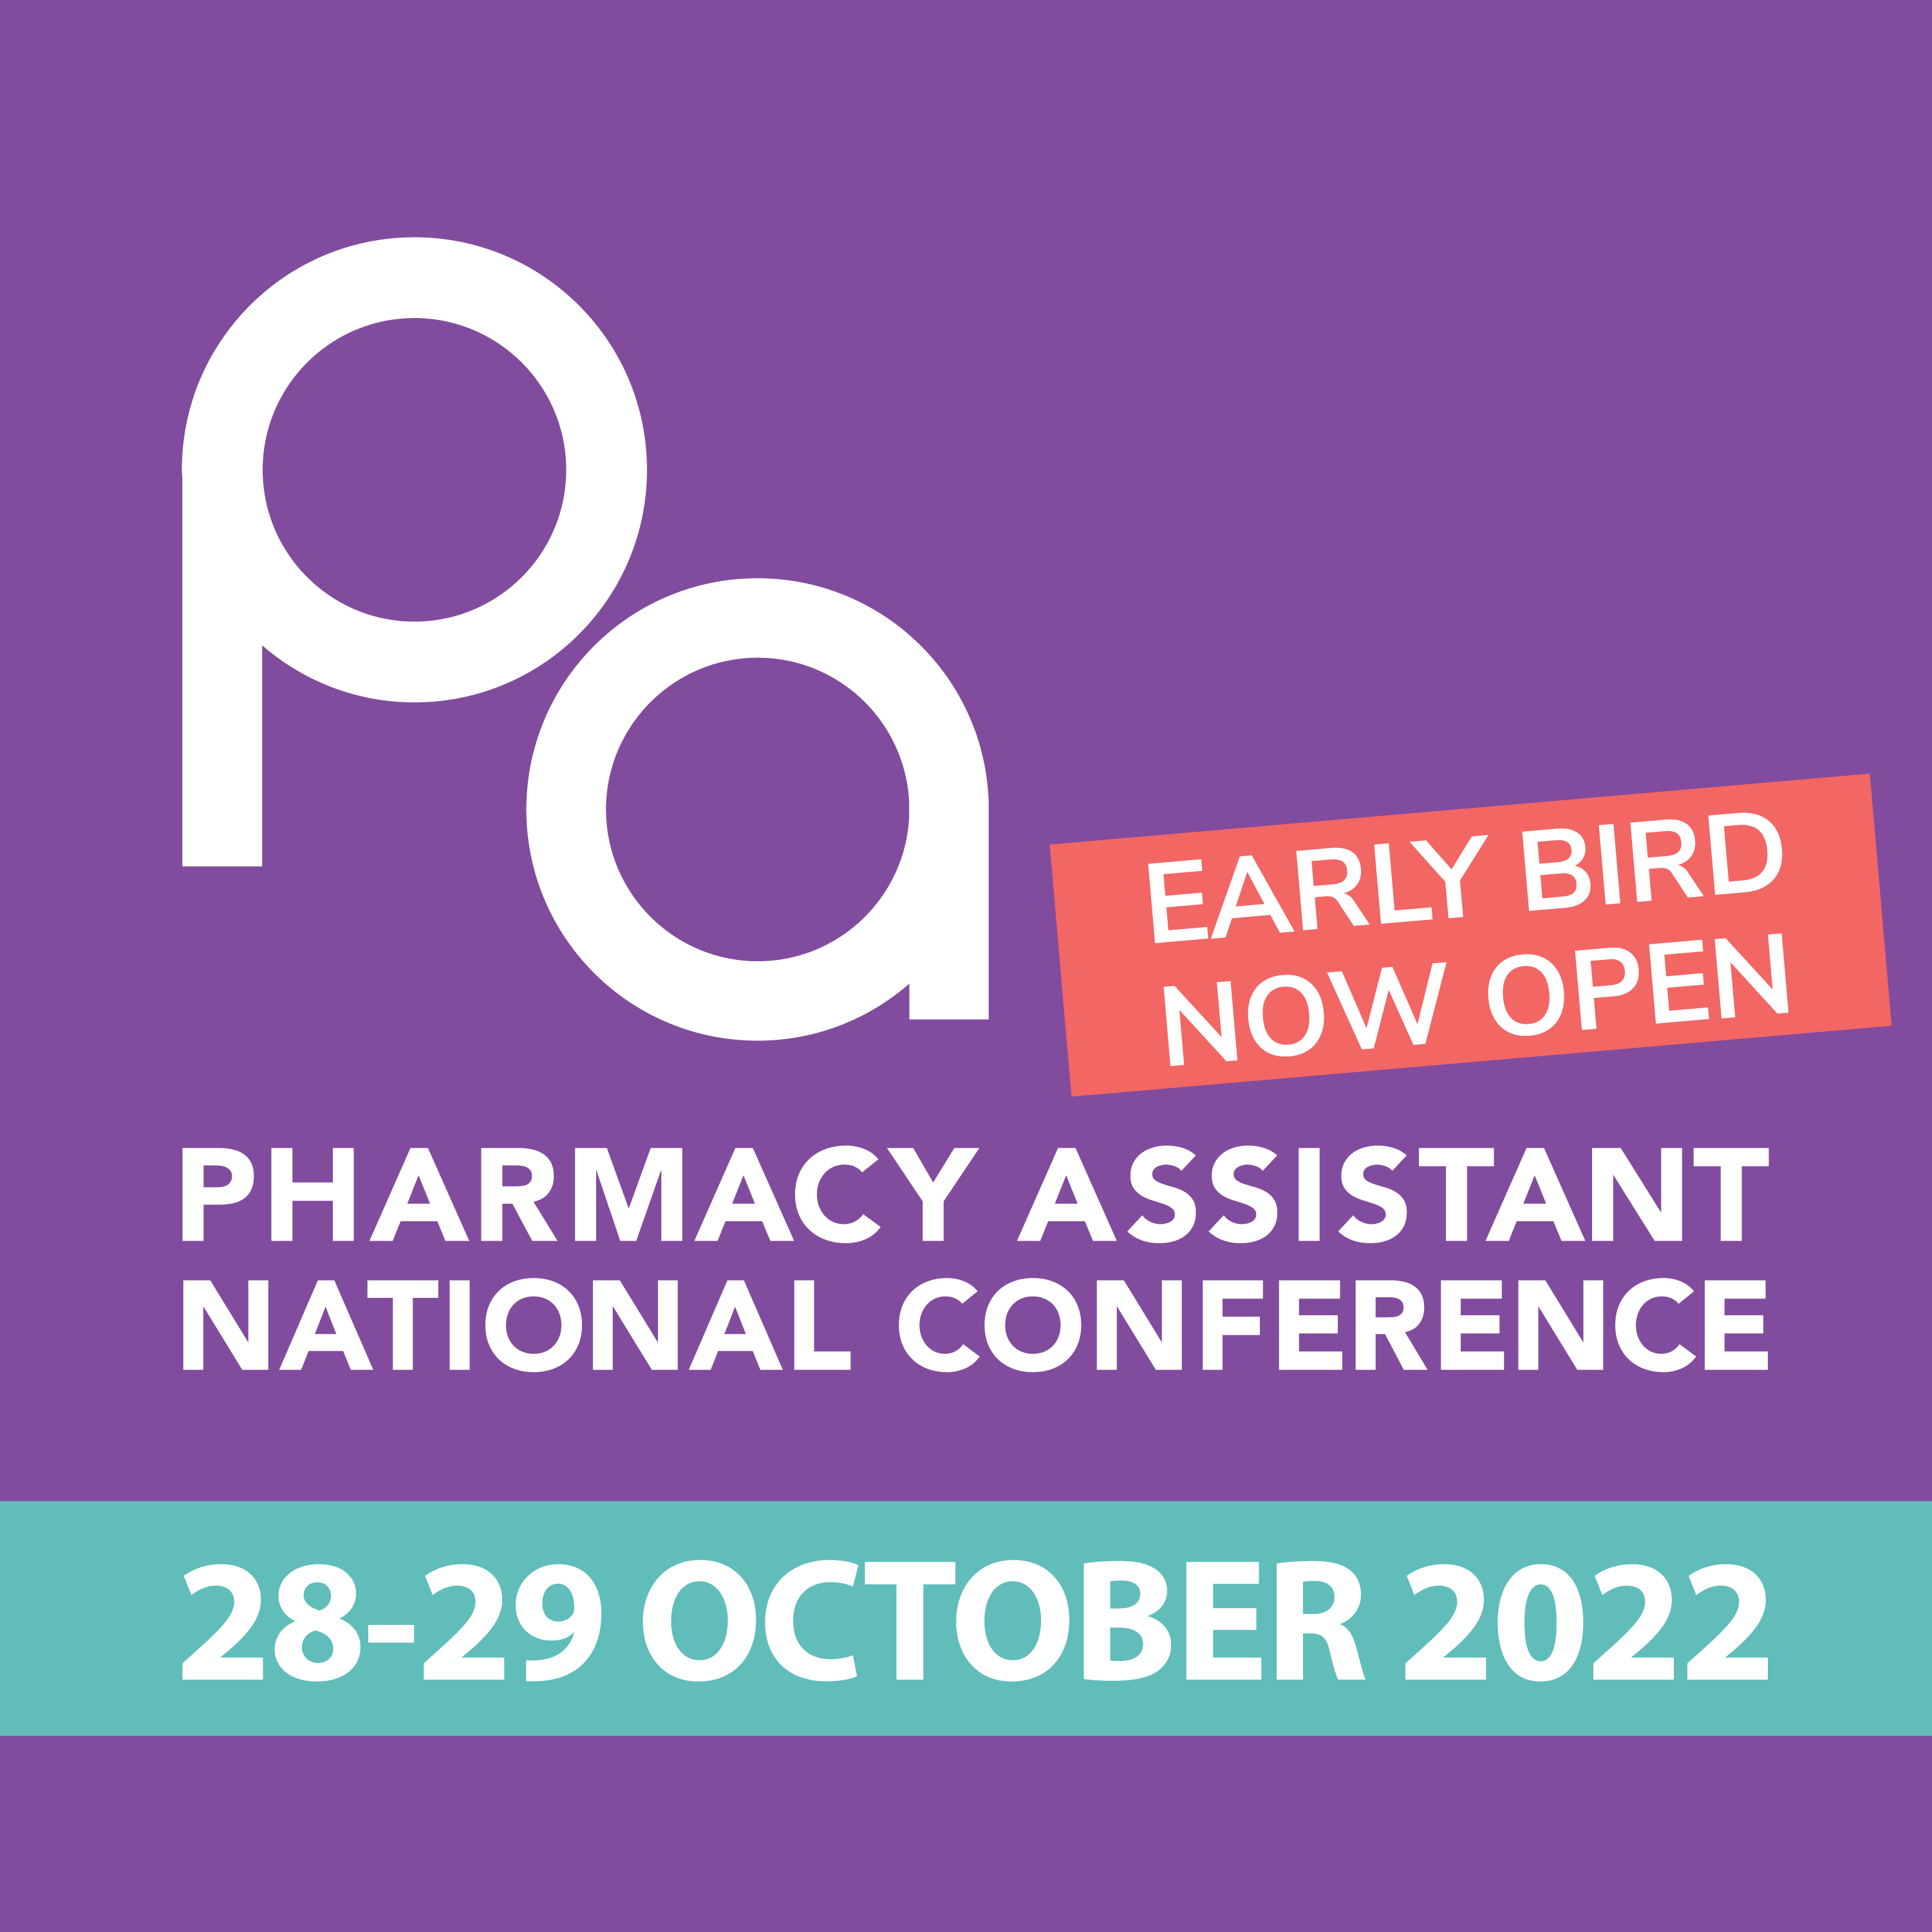 Reward, recognise and retain staff with the Pharmacy Assistant National